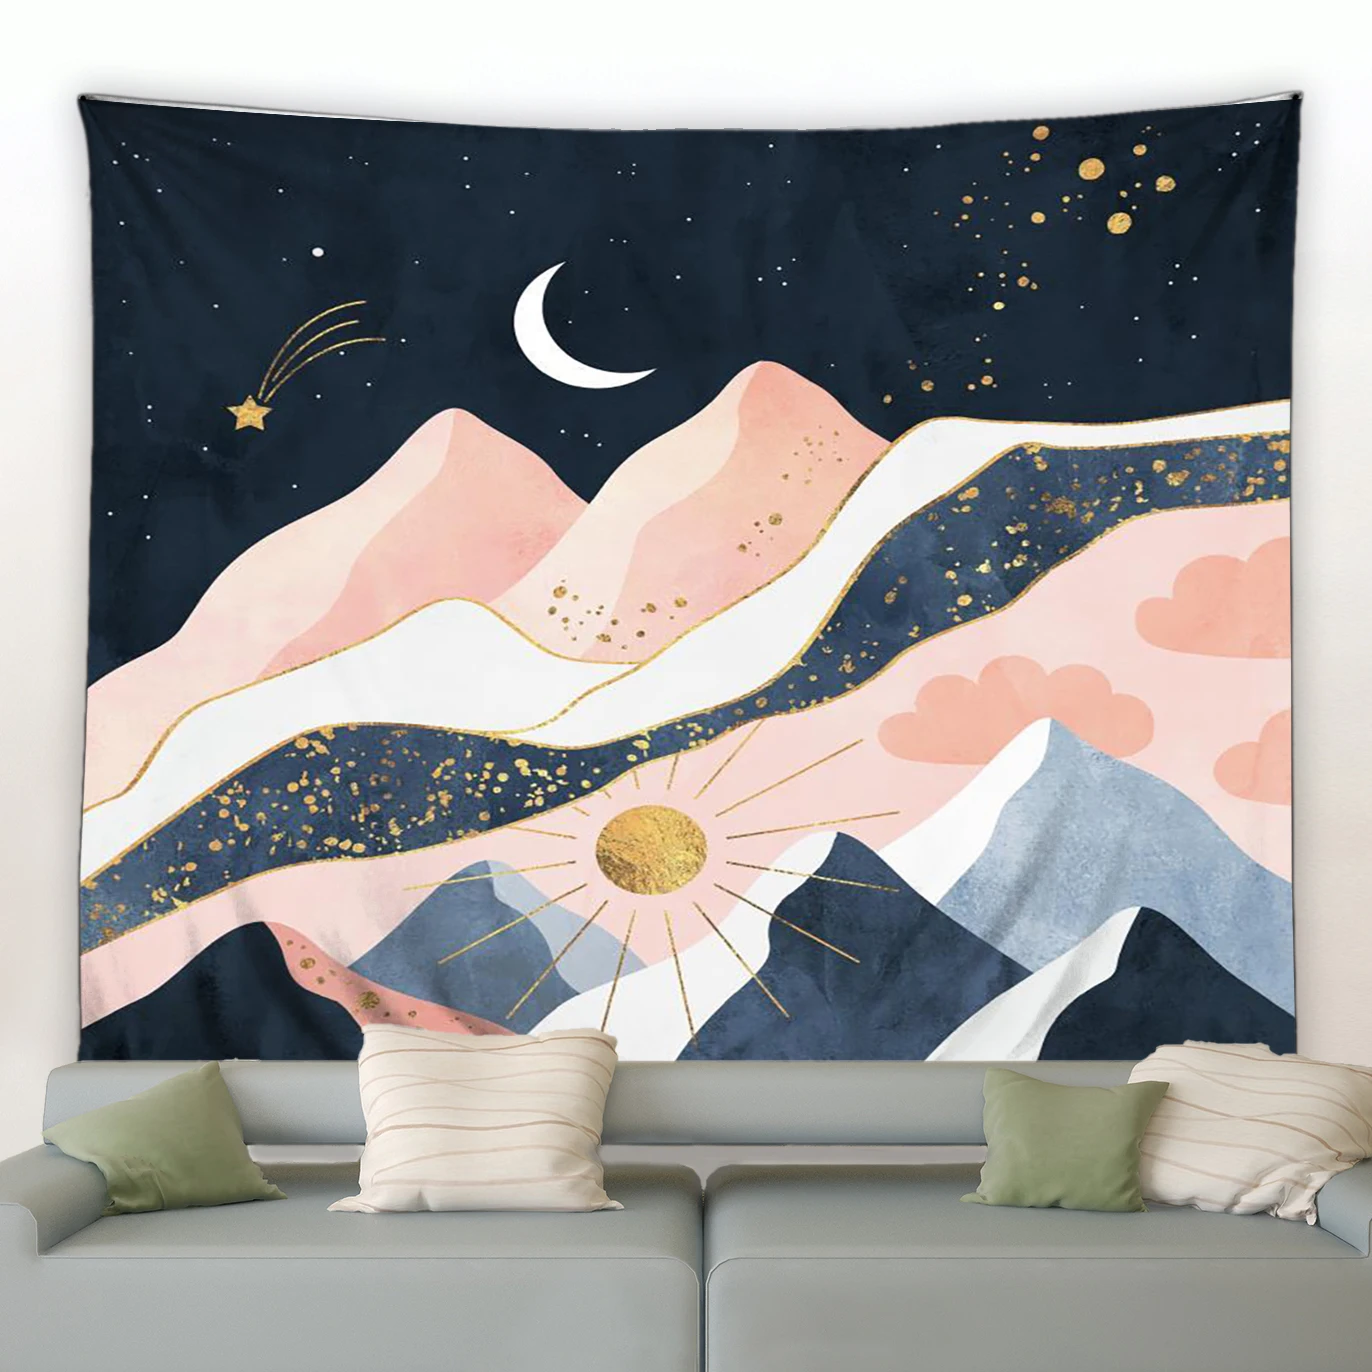 

Landscape Wall Hanging Tapestry Sunset Mountain Beach Towel Dormitory Living Room Bedroom Tapestries Background Decor Blanket